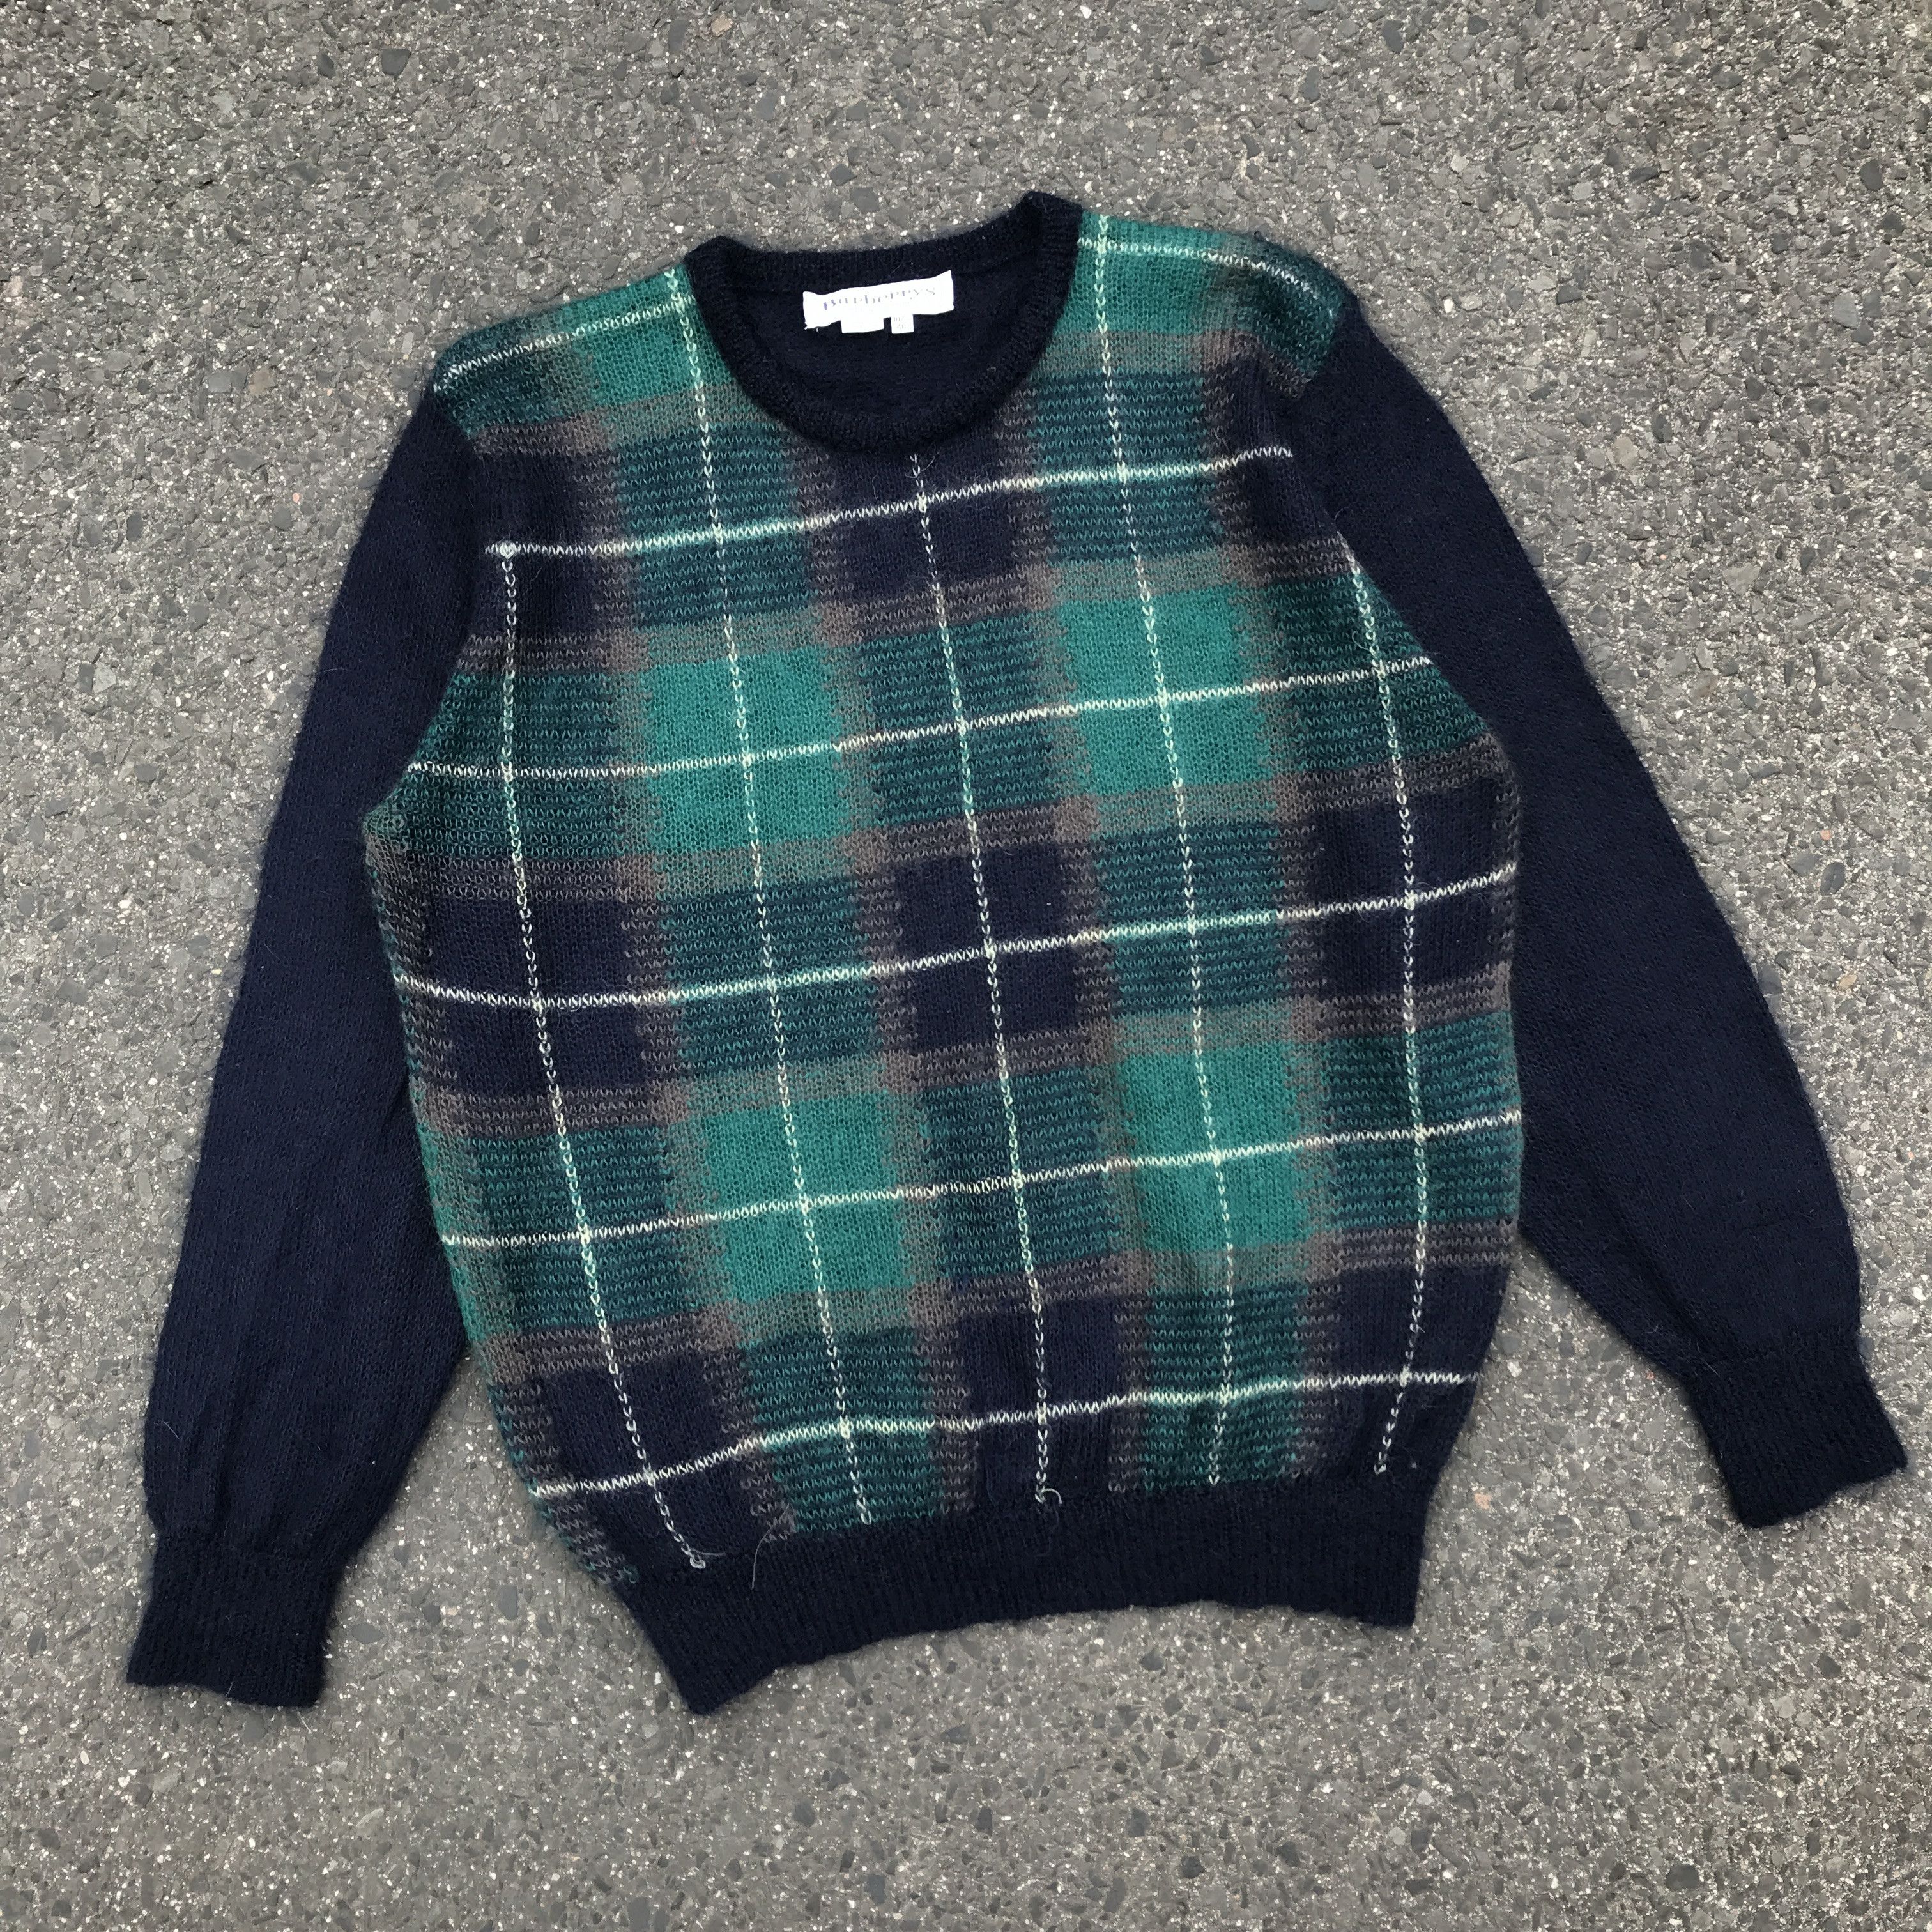 Vintage Vintage 90s Burberry Mohair Sweater | Grailed